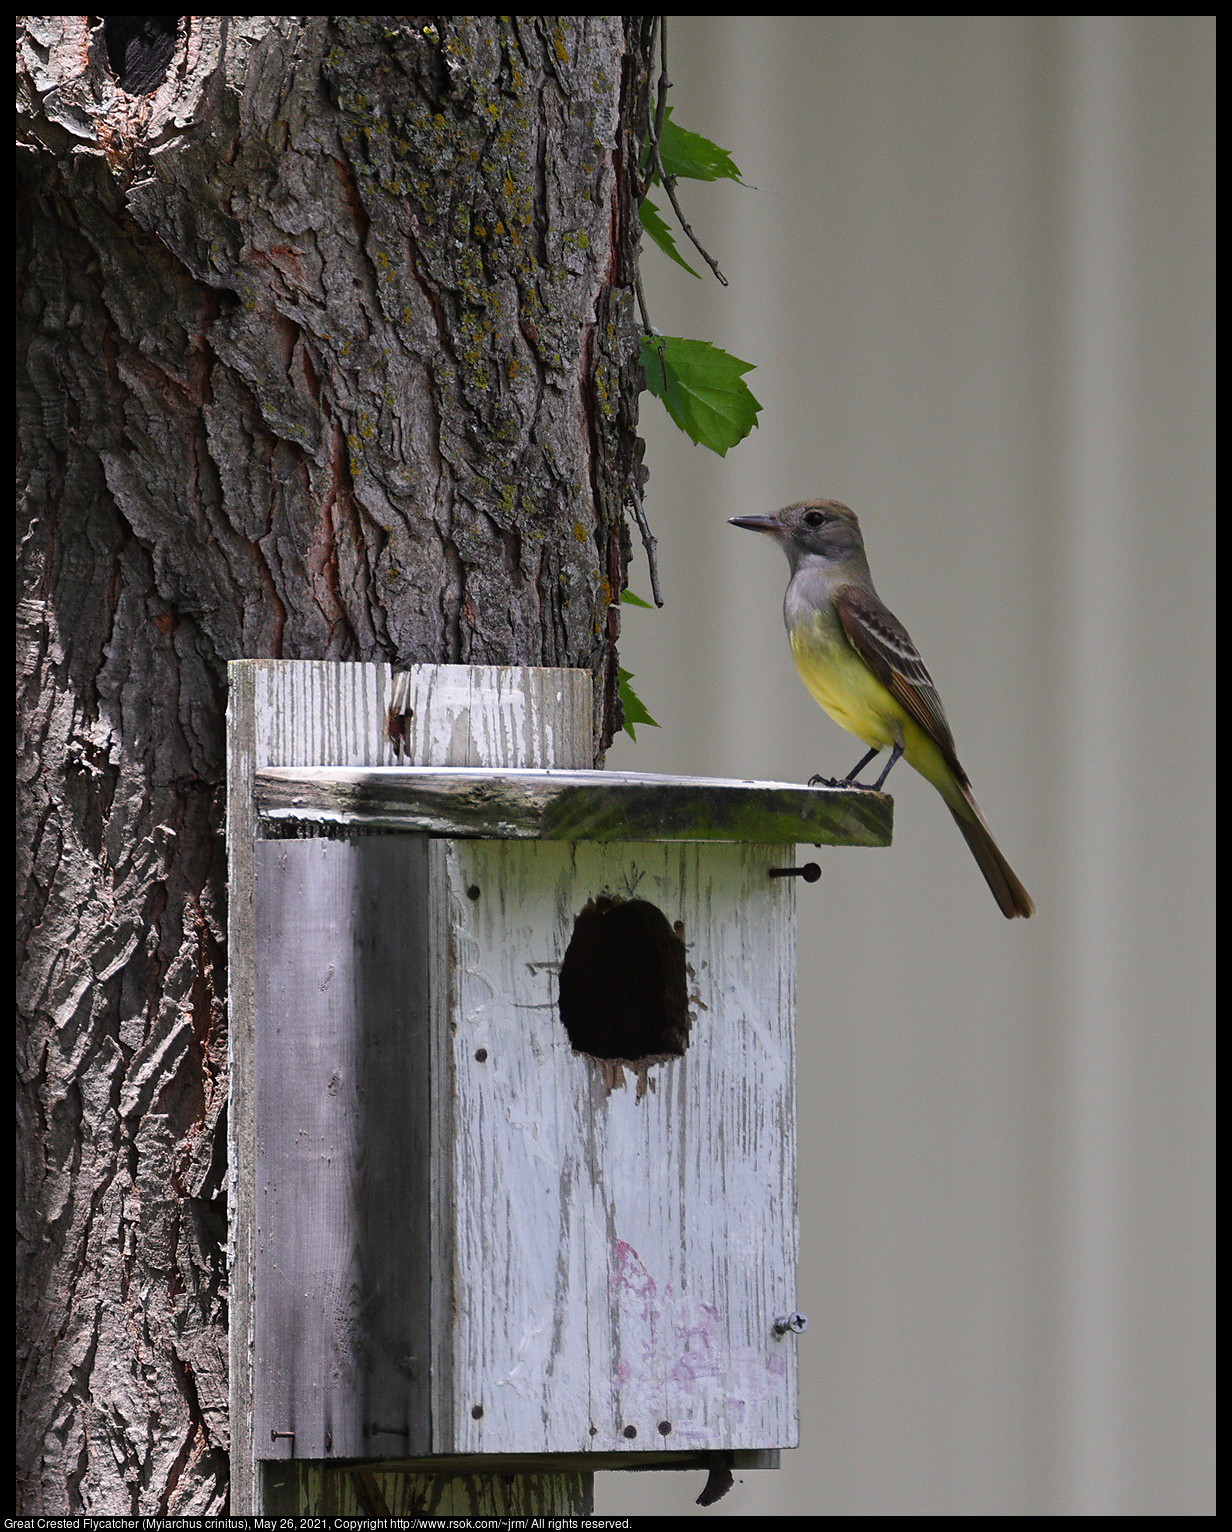 Great Crested Flycatcher (Myiarchus crinitus), May 26, 2021